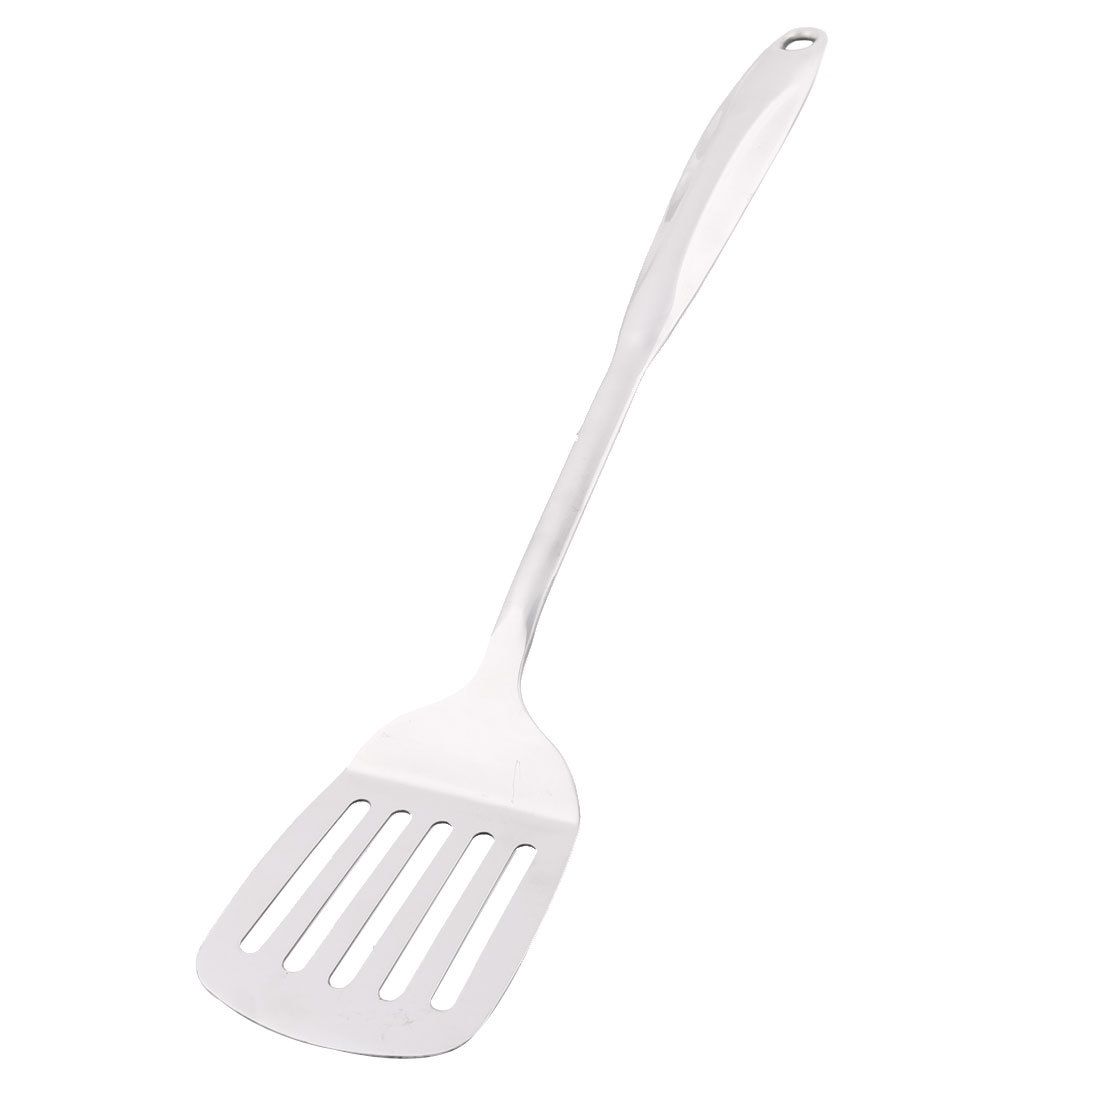 Martha Stewart Everyday Taupe Stainless Steel Slotted Spoon